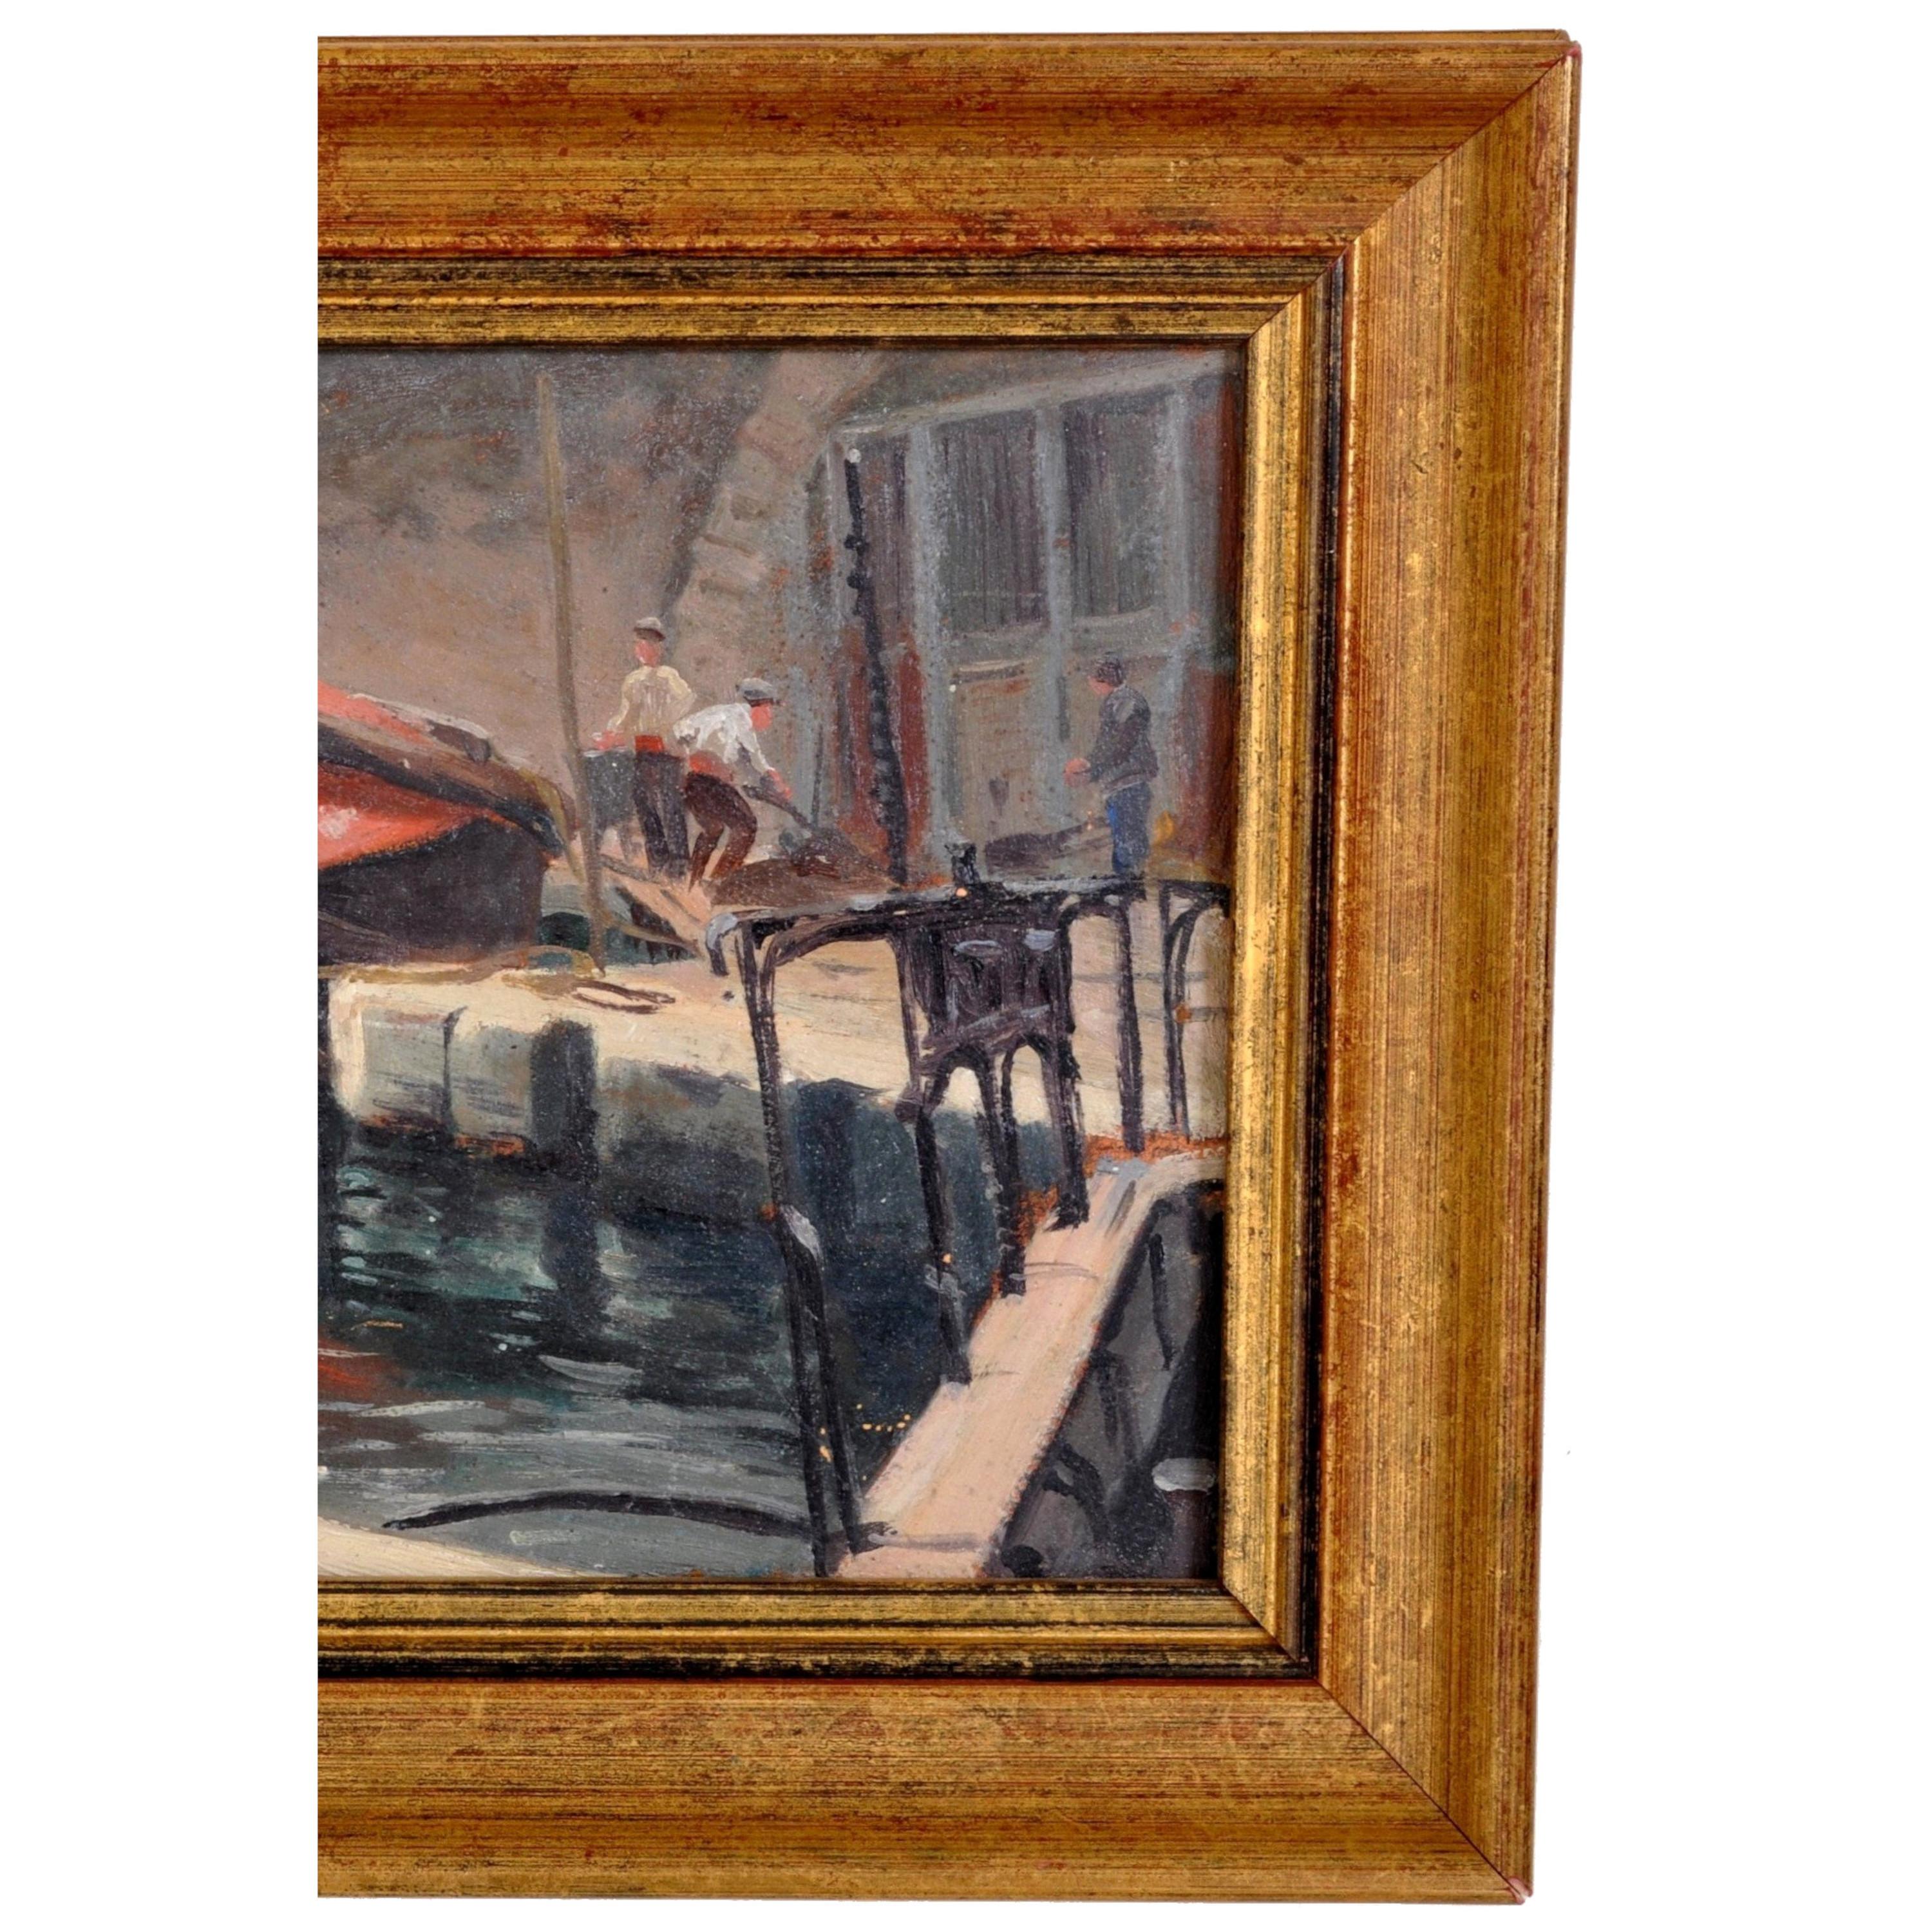 Antique French Impressionist Oil Painting Boat on River Scene Paul de Frick 1900 For Sale 1